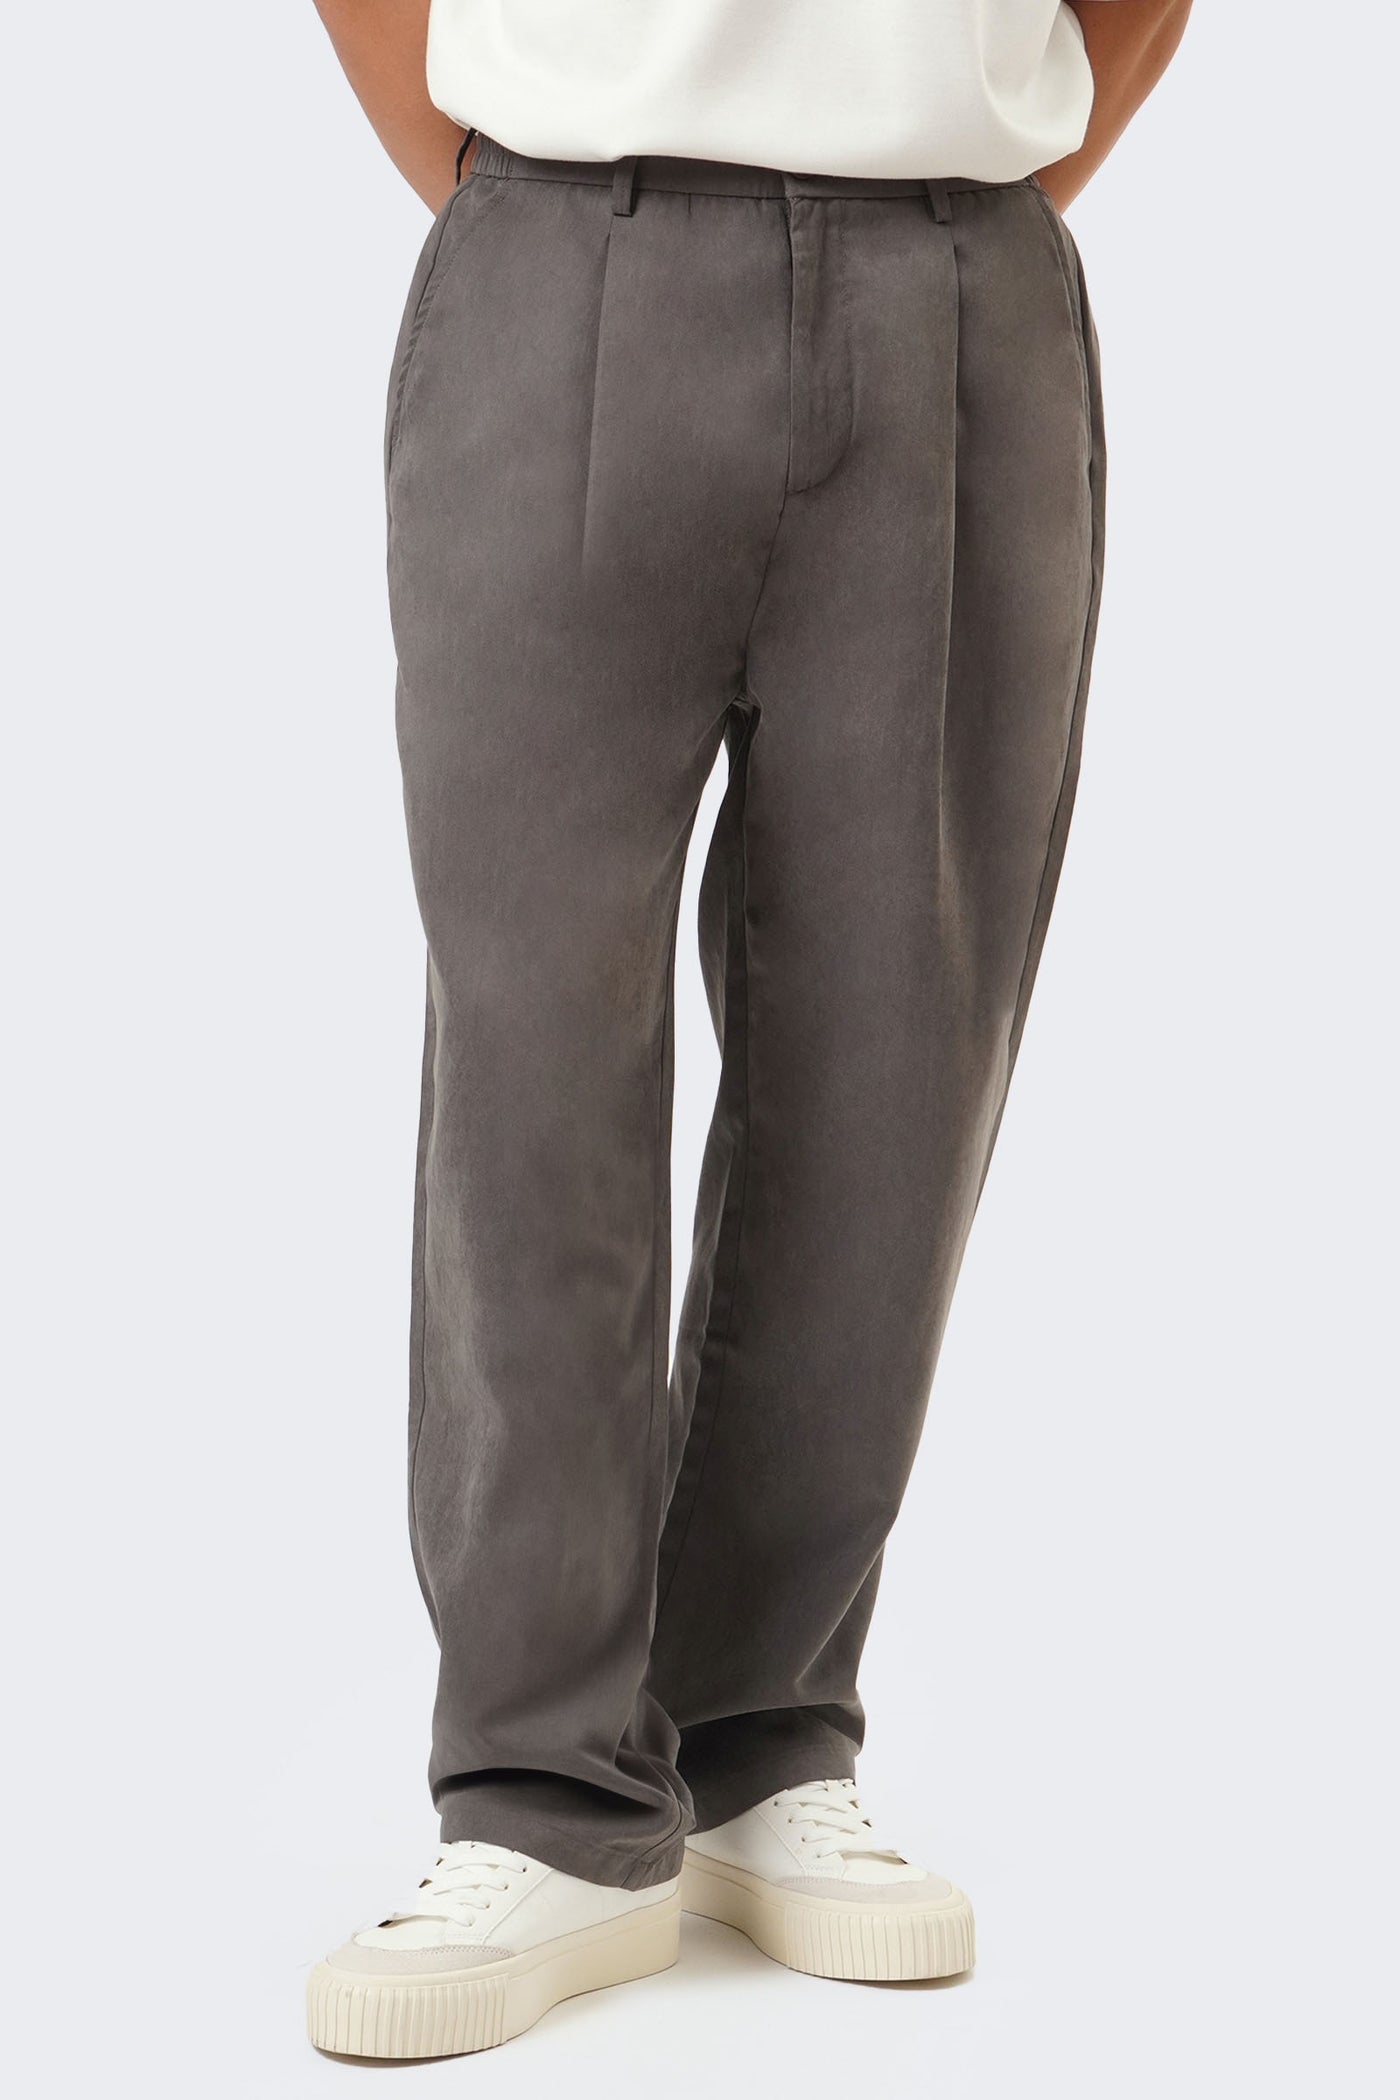 Men's Sueded Straight Leg Pleated Trousers